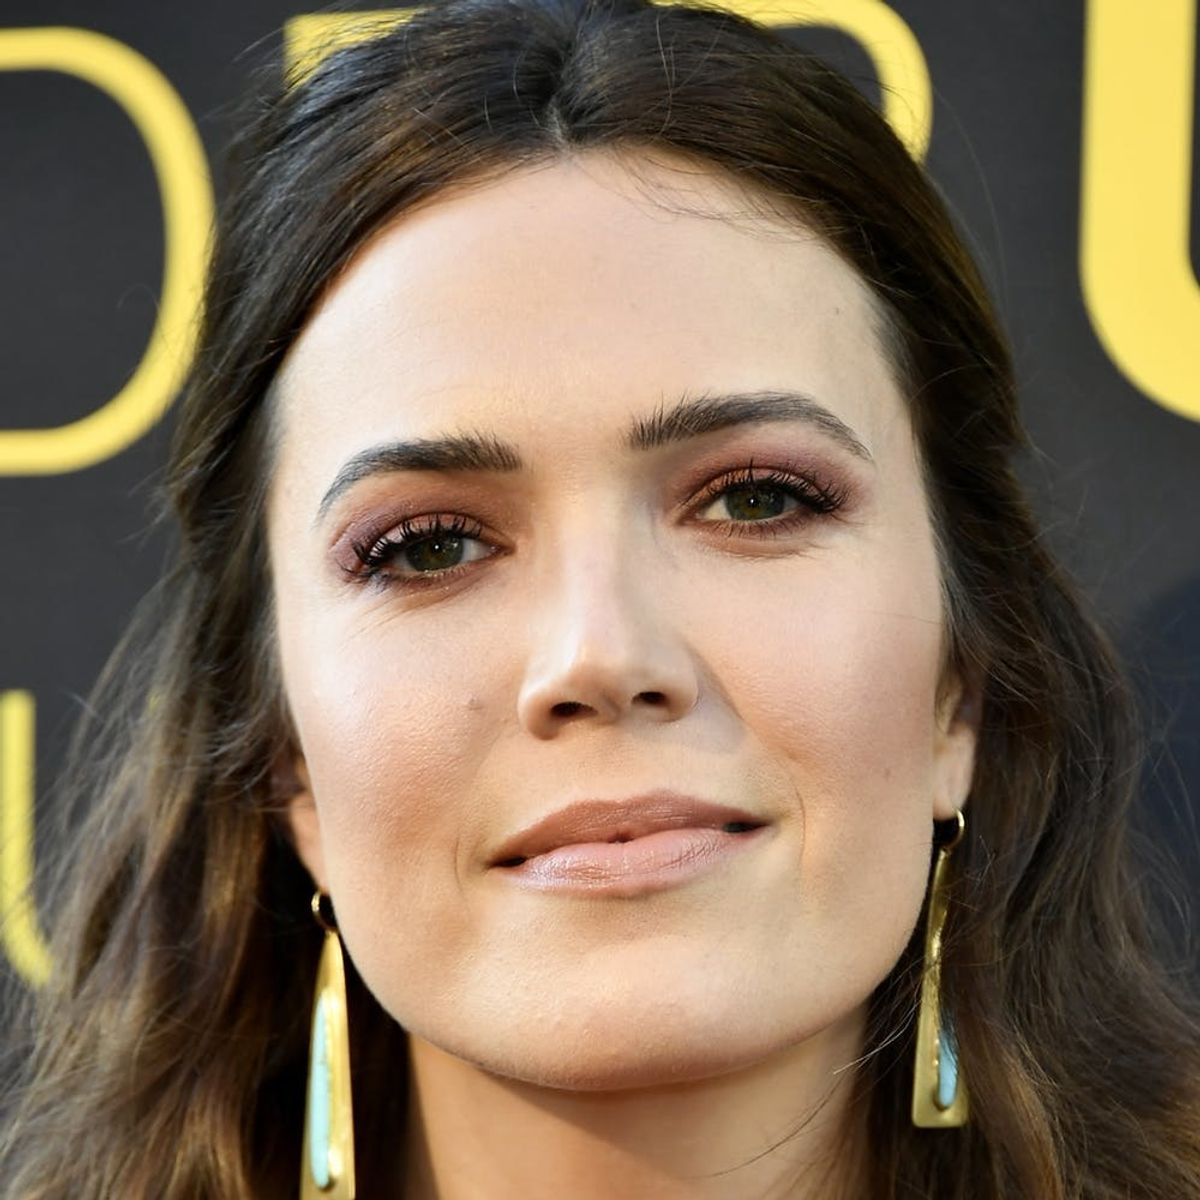 Mandy Moore Reveals the *One* Former Hairstyle That Still Makes Her Cringe